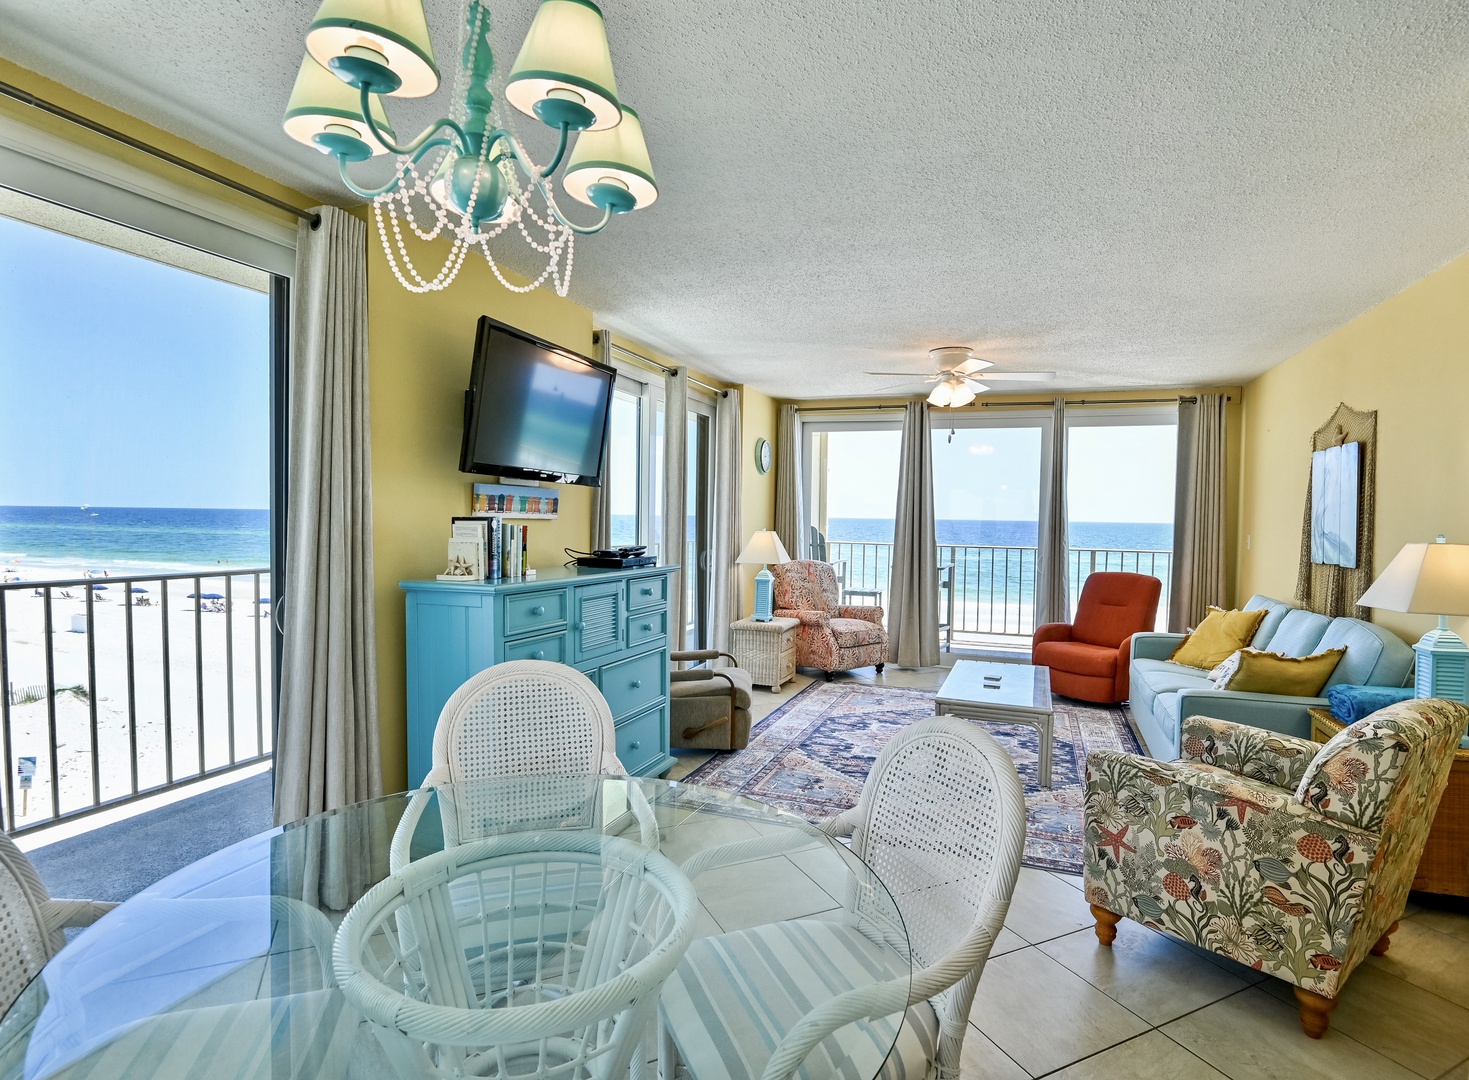 Step into the Serenity of the Oceanfront Oasis